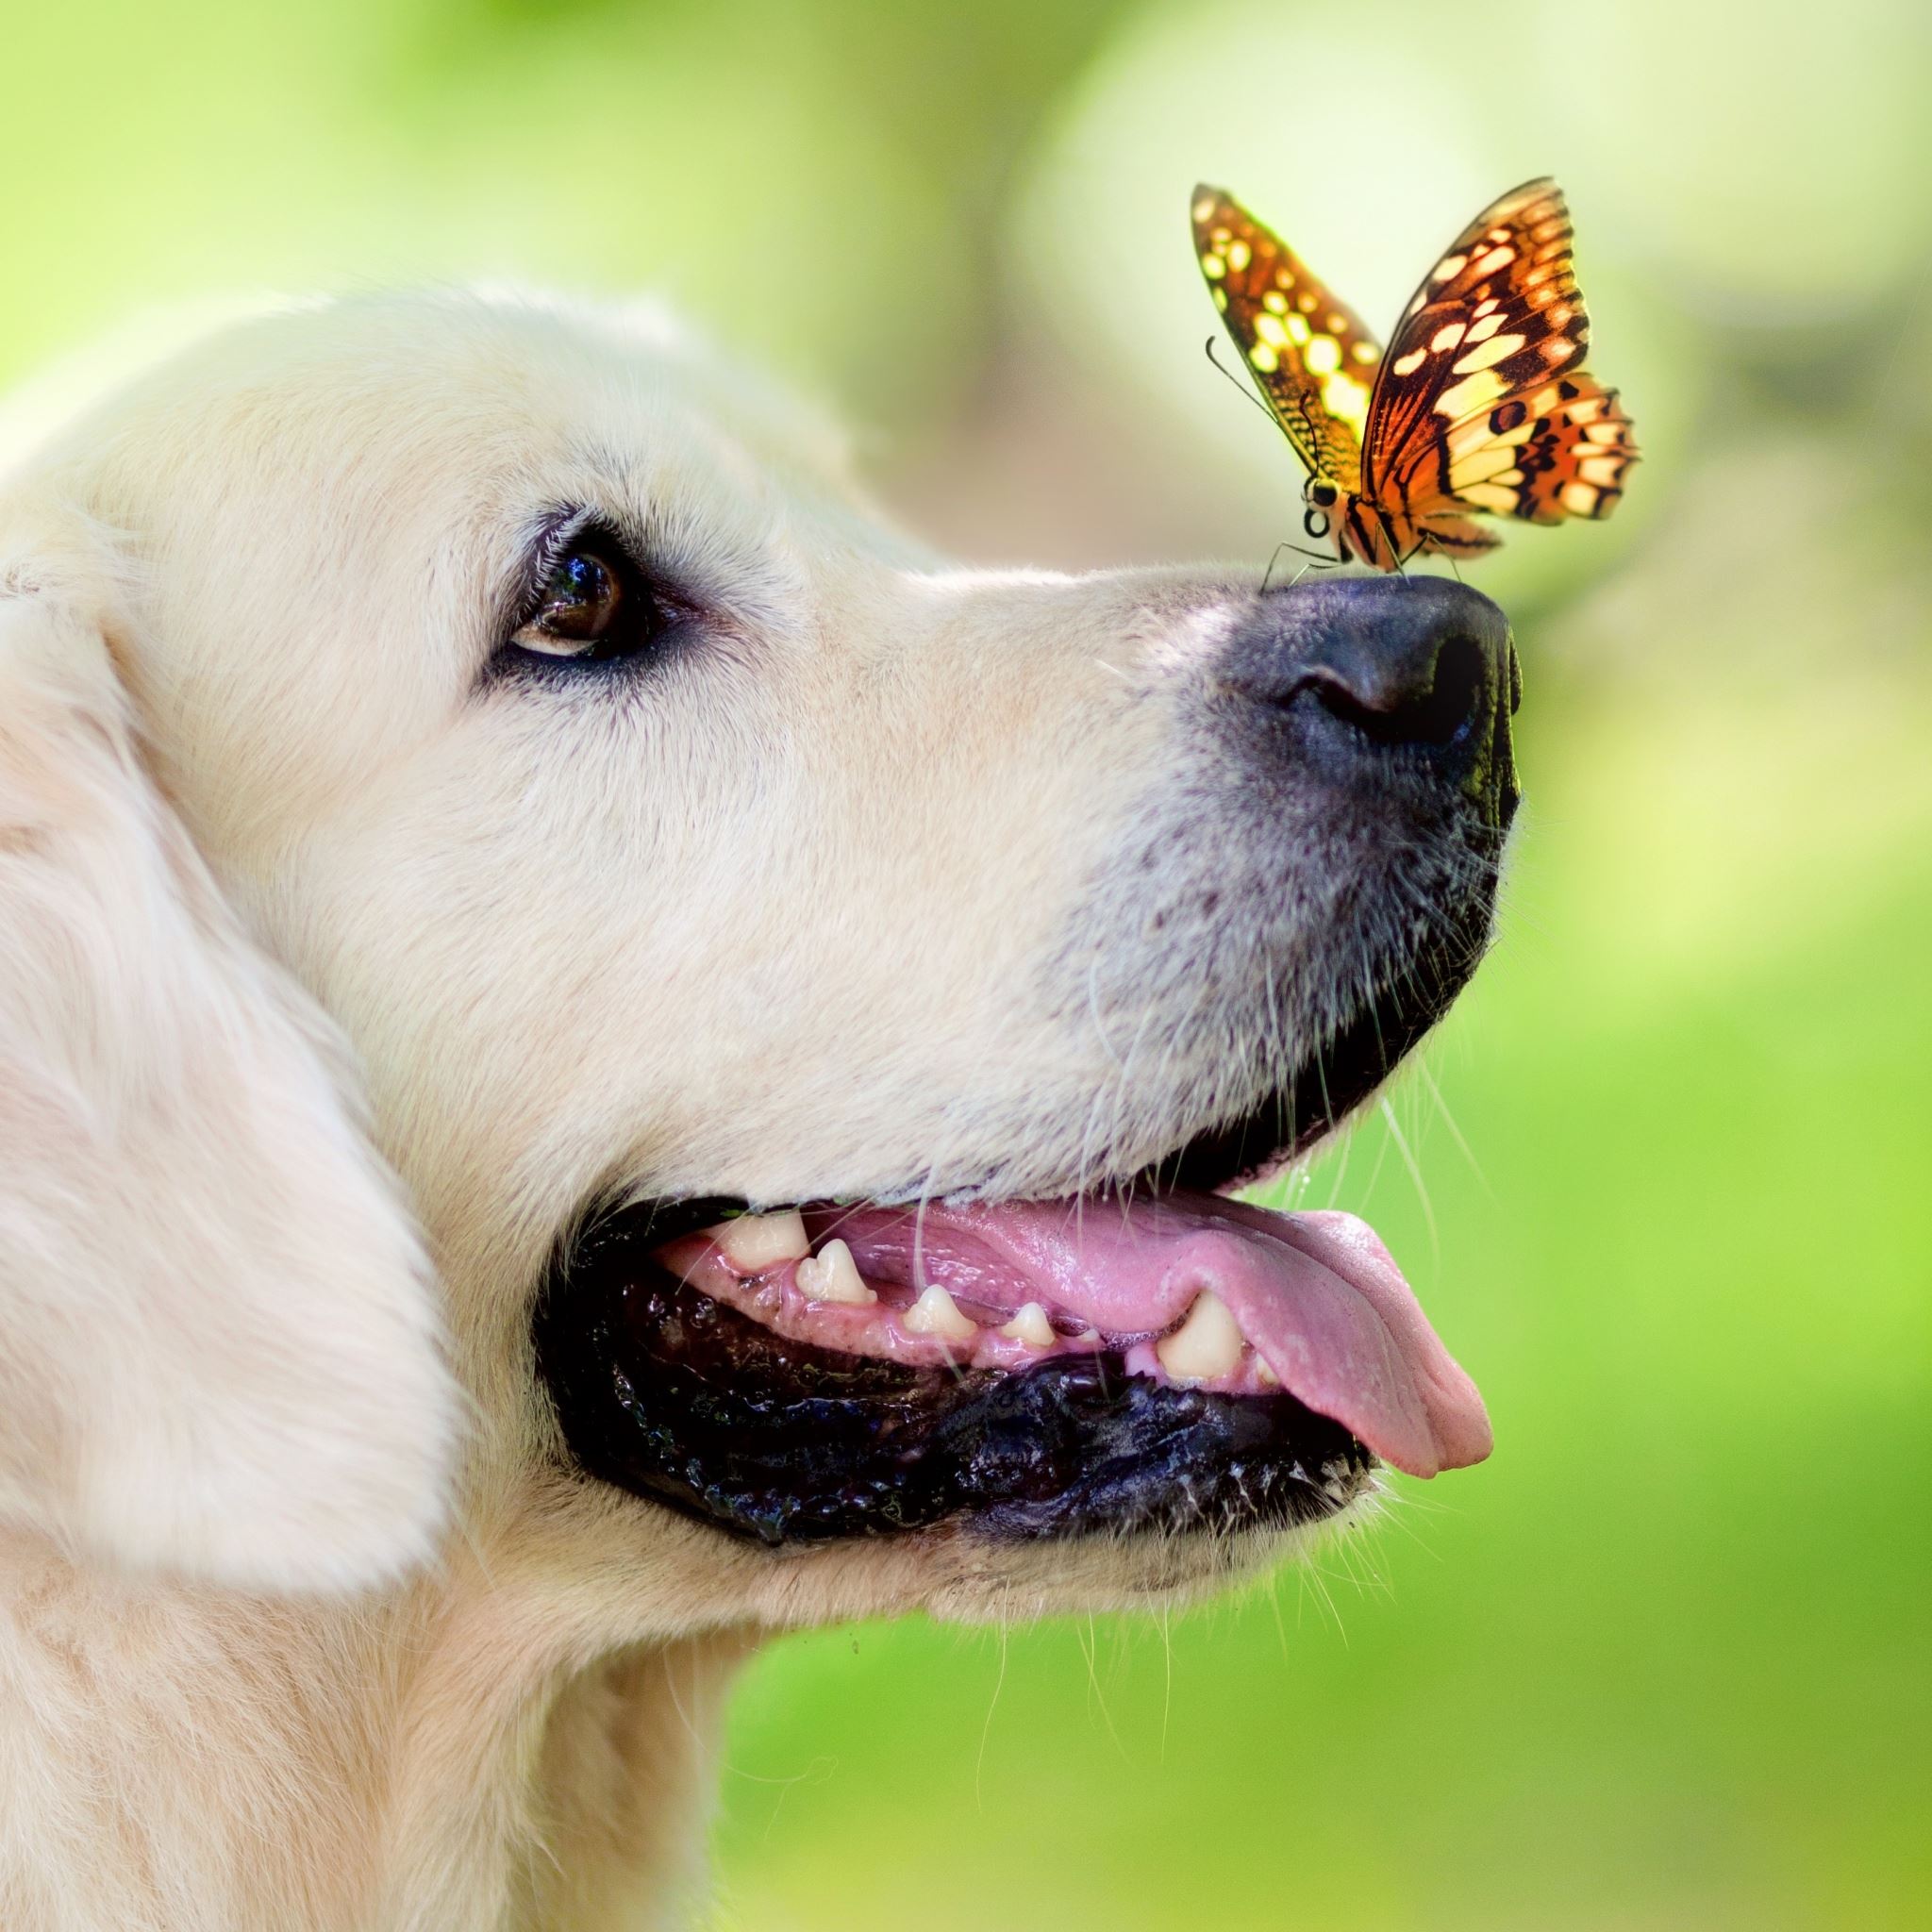 Dog Muzzle Butterfly Tongue Sticking Out Spring Summer iPad Air Wallpaper Free Download